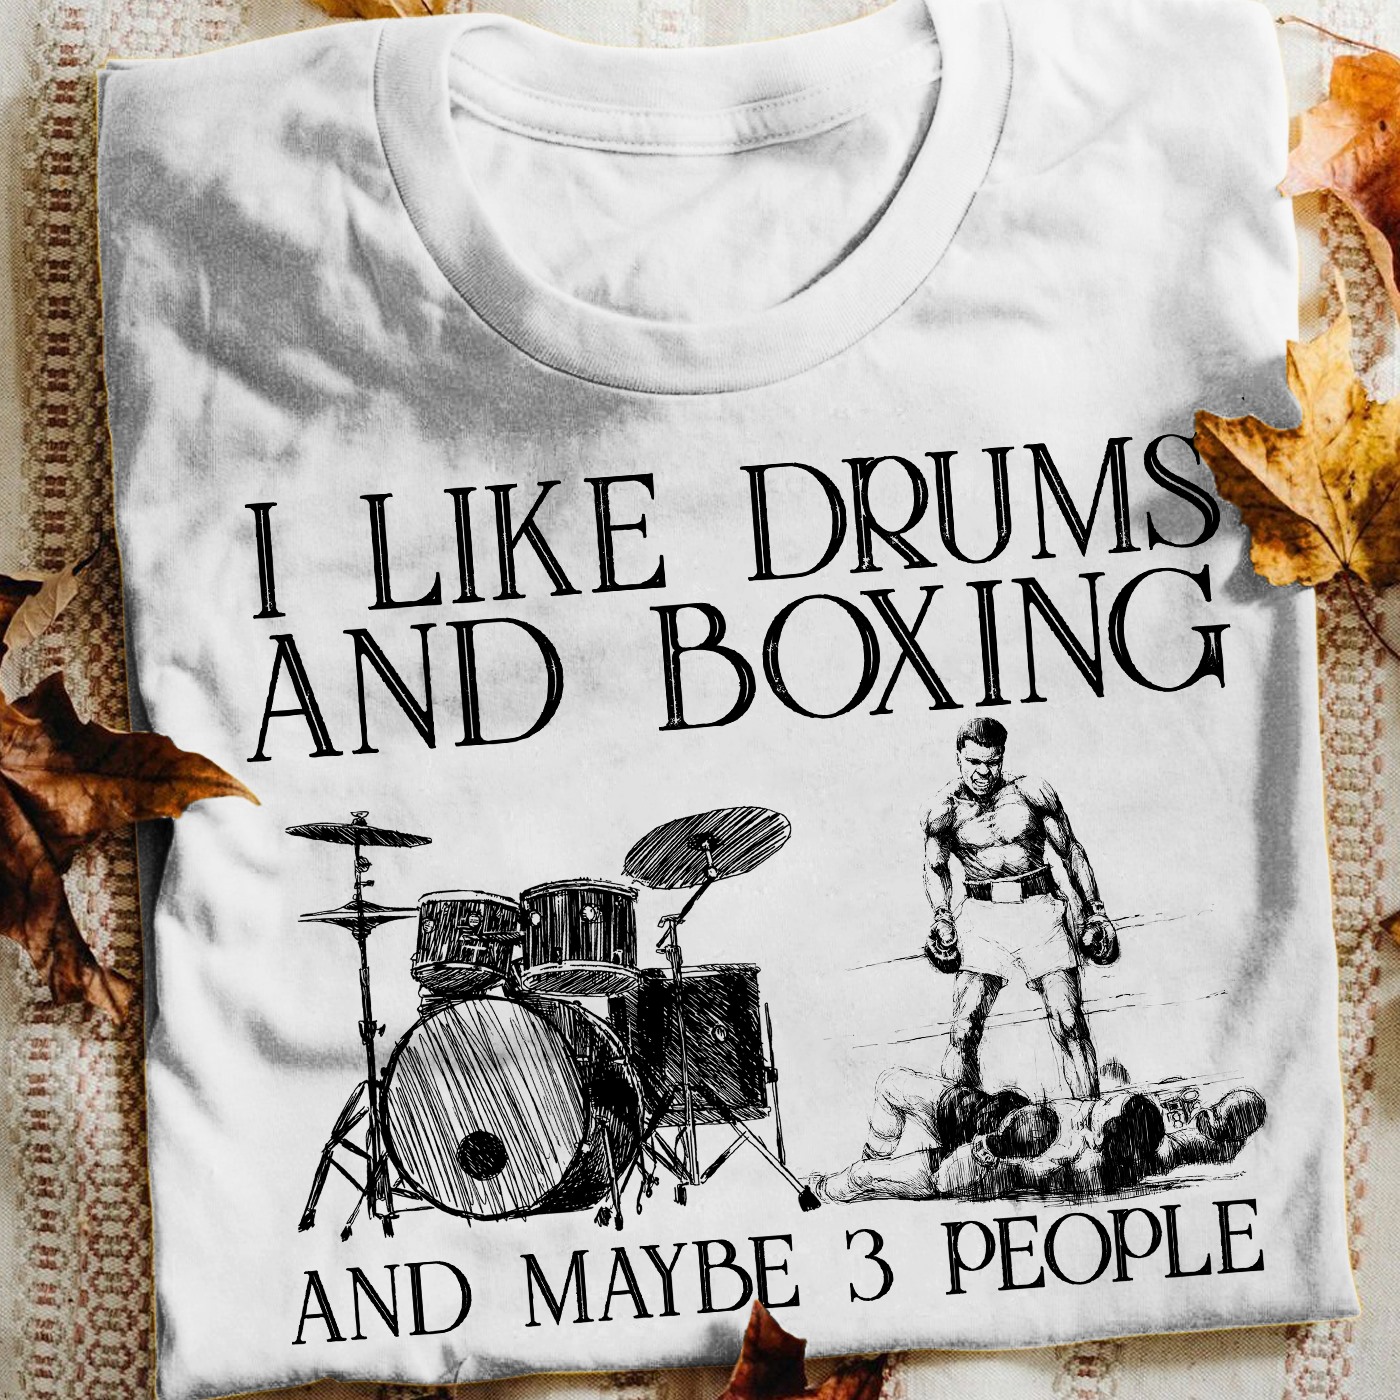 Drums Boxing – I like drums and boxing and maybe 3 people